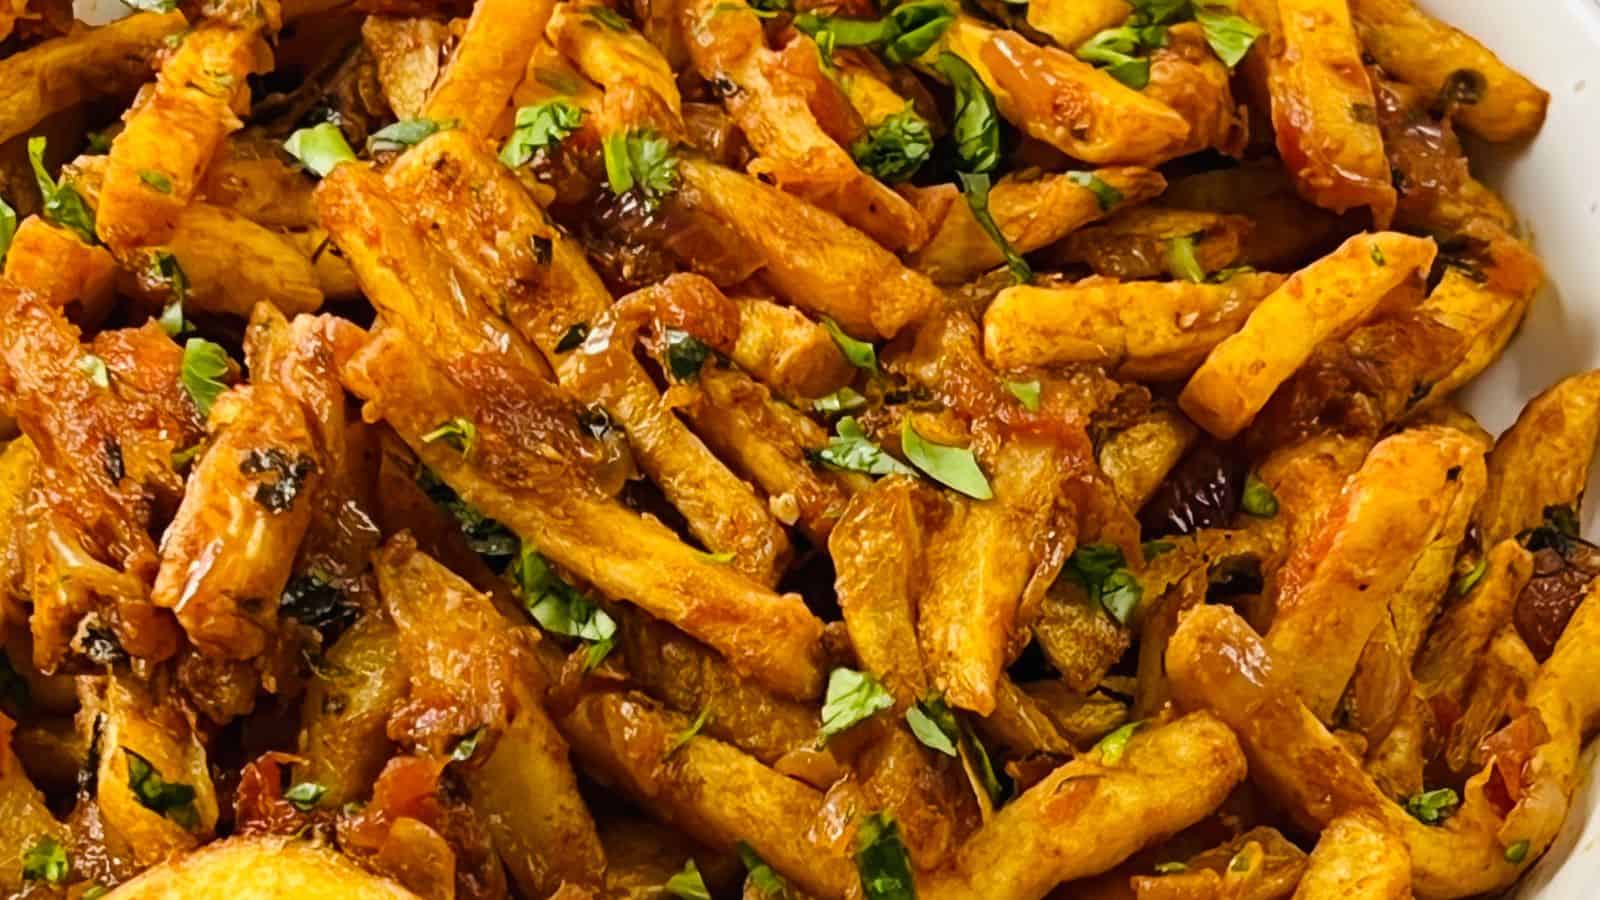 Close-up of a dish filled with golden brown fries, garnished with chopped fresh herbs.